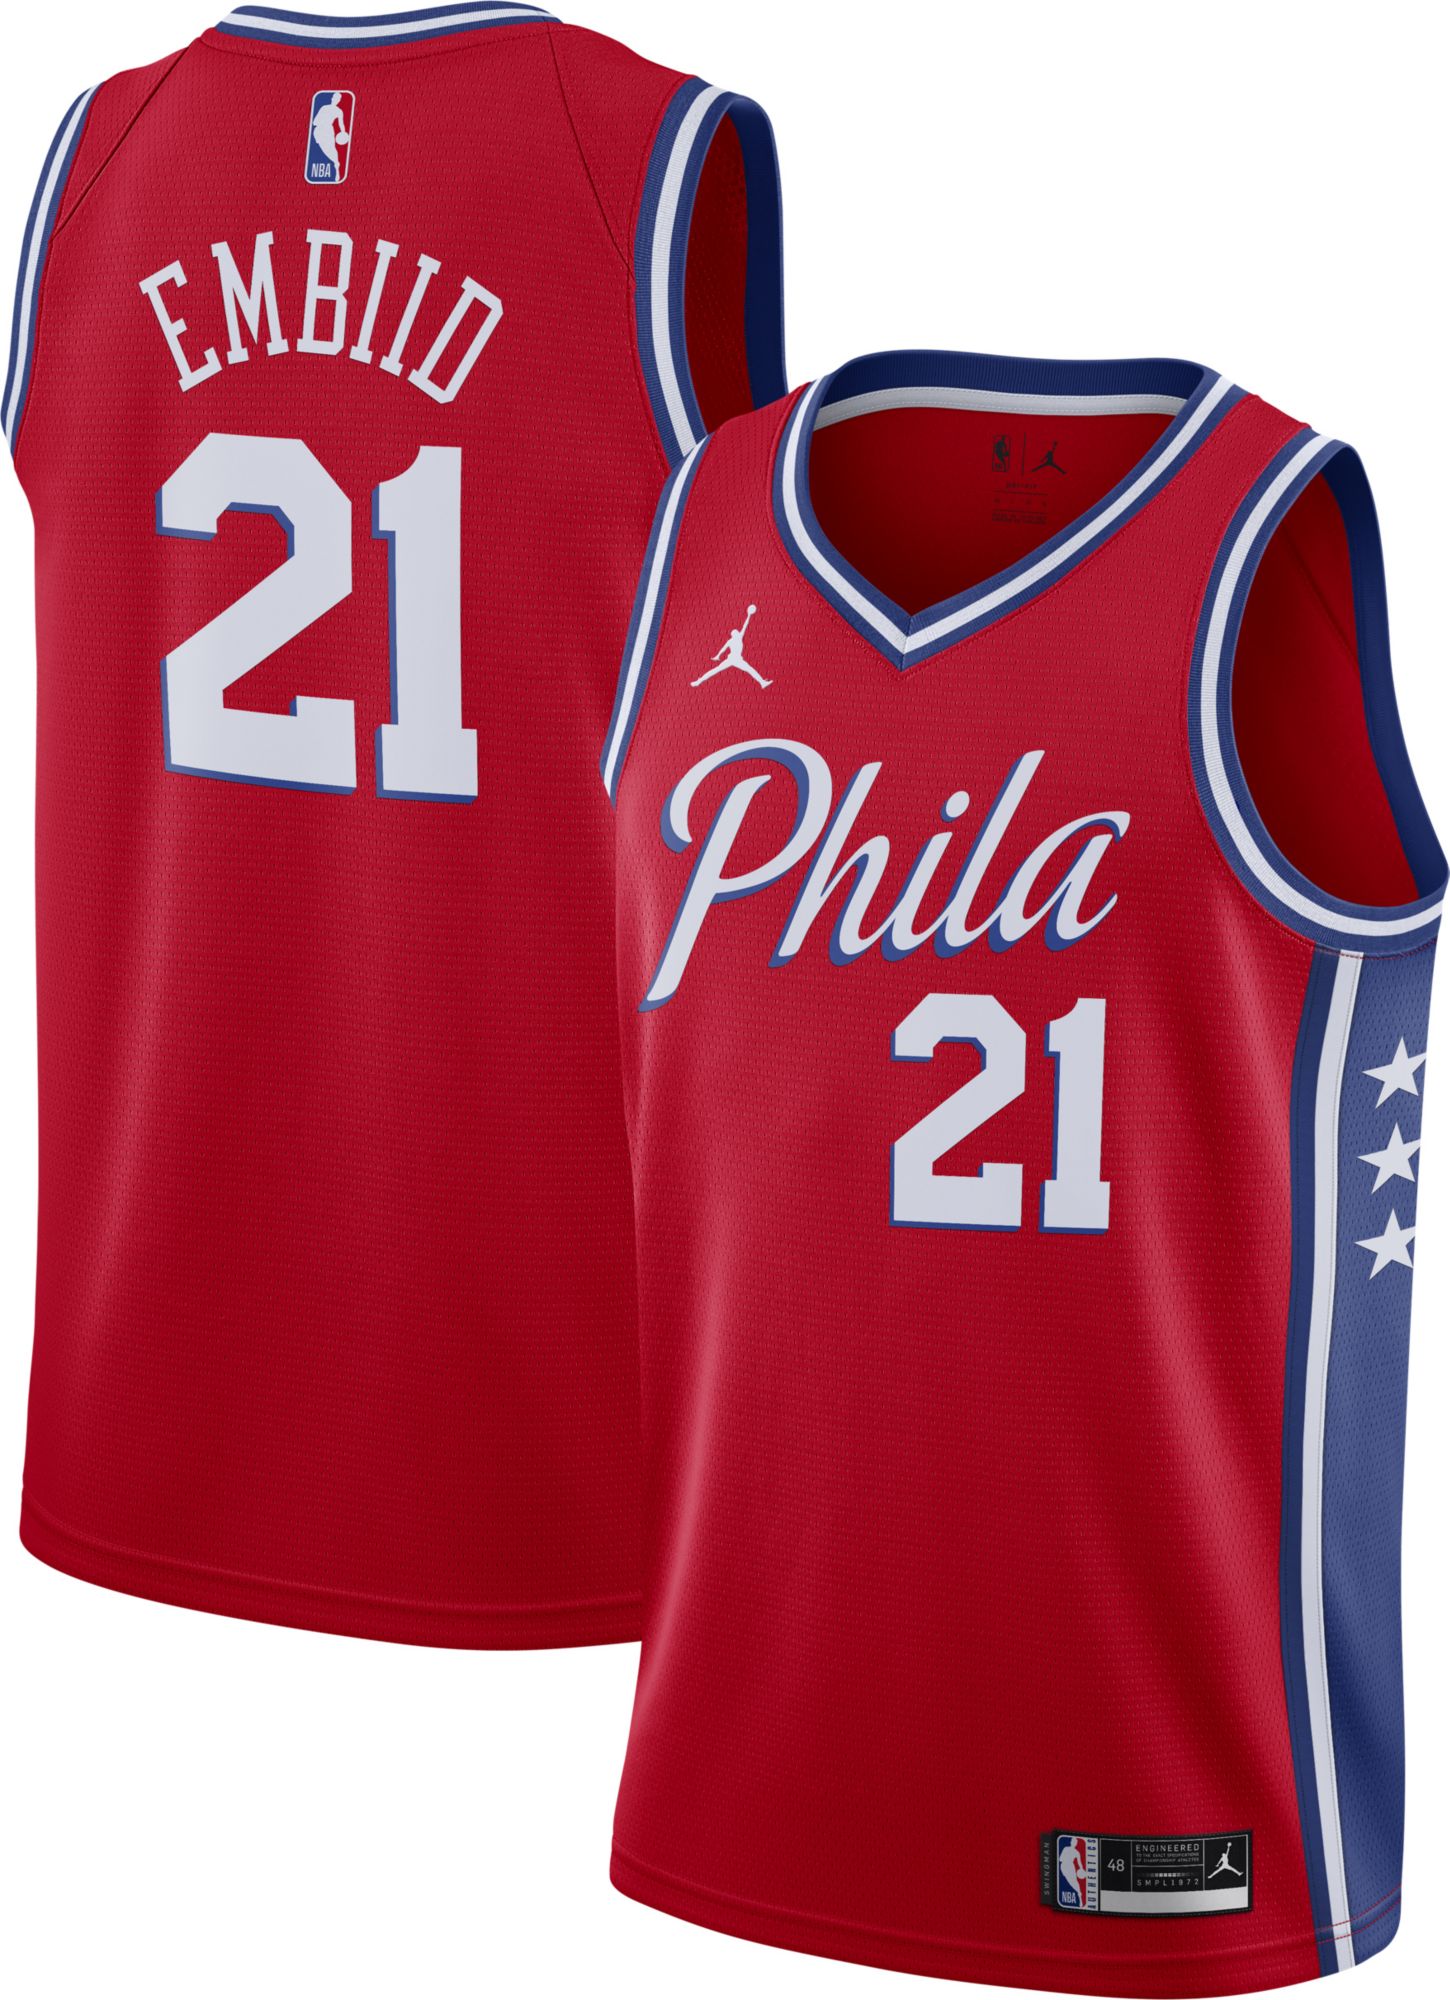 sixers jersey white